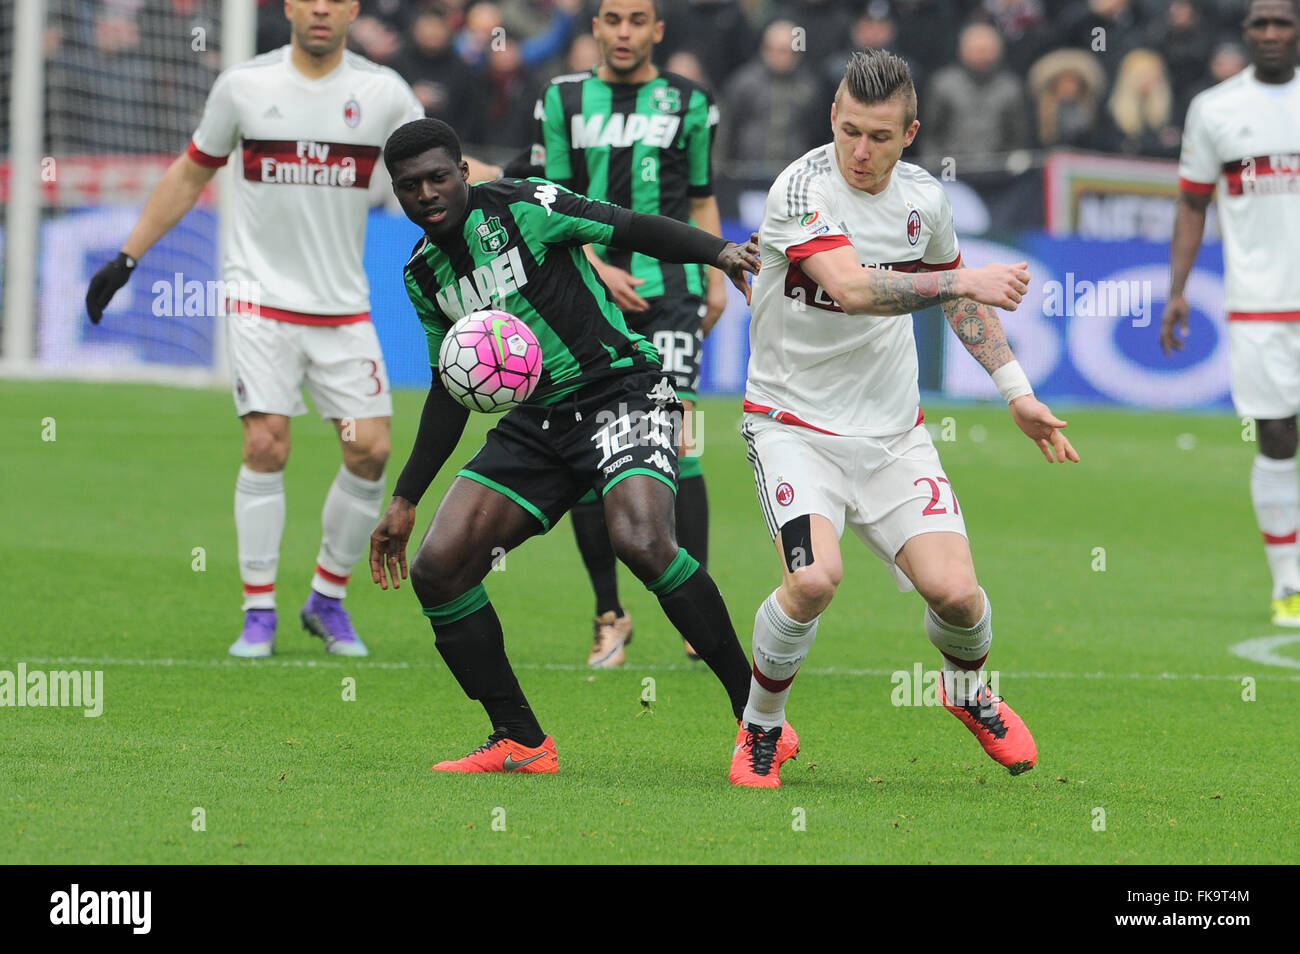 Reggio Emilia, Italy. 06th Mar, 2016. Joseph Alfred Duncan Sassuolo's midfielder and Juraj Kucka Milan's midfielder and national team of Slovacchia fight for the ball during the Serie A football match between US Sassuolo Calcio and AC Milan at Mapei Stadium in Reggio Emilia. US Sassuolo Calcio vs AC Milan Serie A football championship 2015/2016. US Sassuolo Calcio wins 2 - 0 over AC Milan. Joseph Alfred Duncan and Nicola Domenico Sansone are the scorers. Credit:  Massimo Morelli/Pacific Press/Alamy Live News Stock Photo